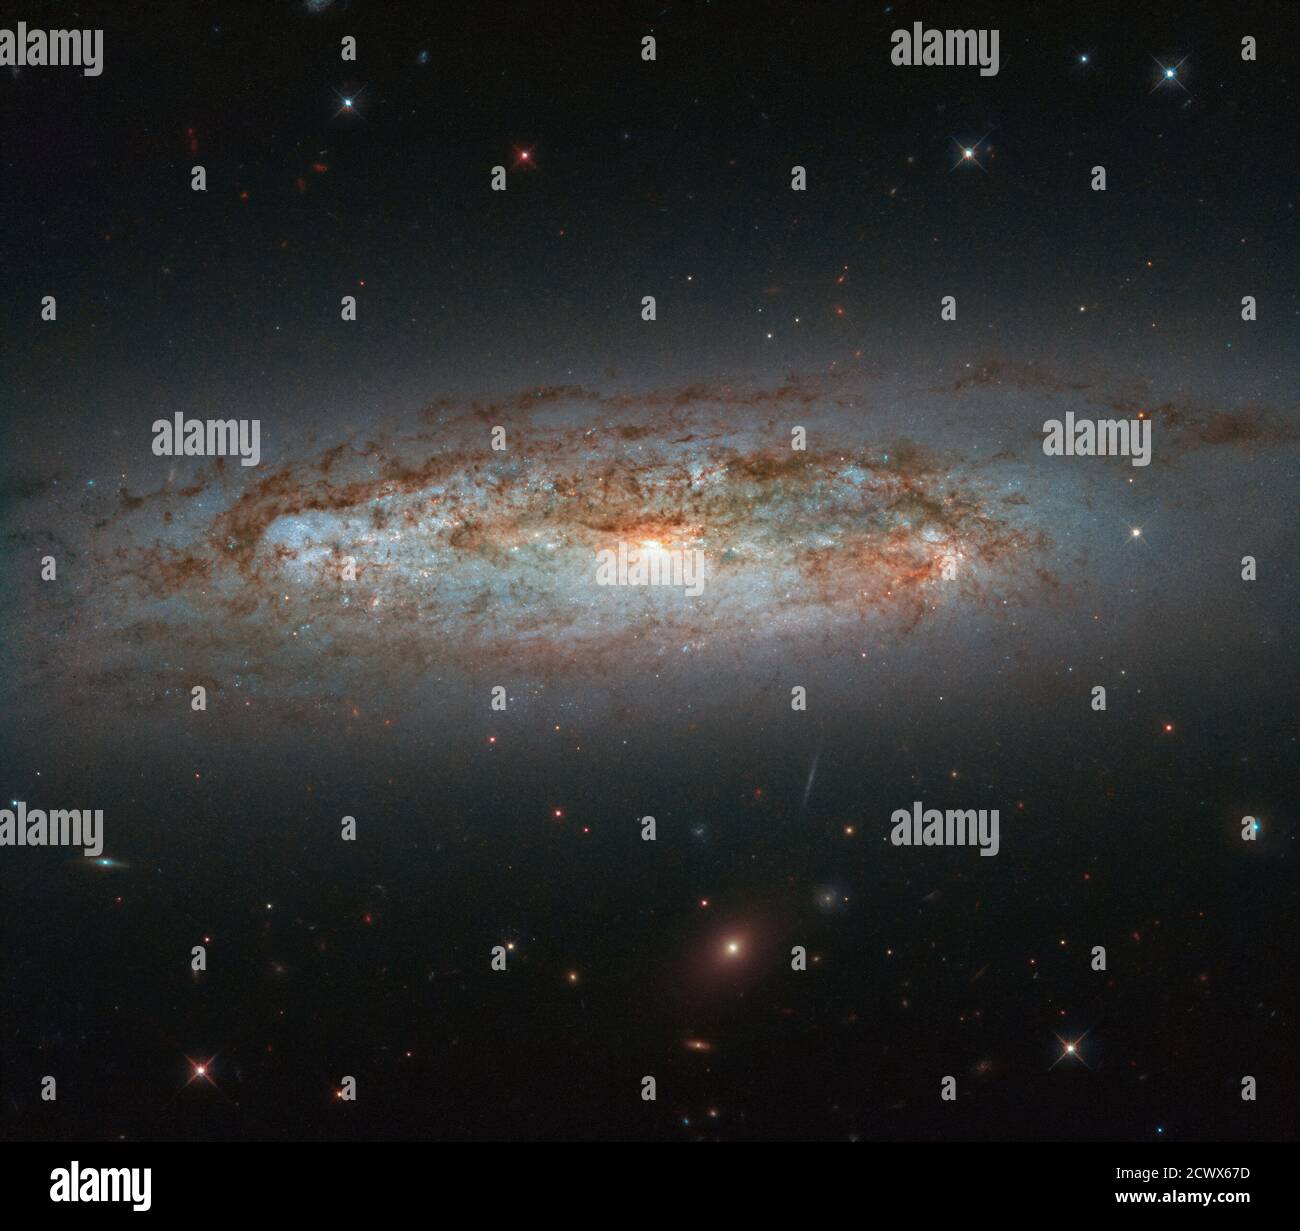 Hubble Views Galaxy’s Dazzling Display NGC 3175 is located around 50 million light-years away in the constellation of Antlia (the Air Pump). The galaxy can be seen slicing across the frame in this image from the NASA/ESA Hubble Space Telescope. Its mix of bright patches of glowing gas, dark lanes of dust, bright core, and whirling, pinwheeling arms come together to paint a beautiful celestial scene. Stock Photo